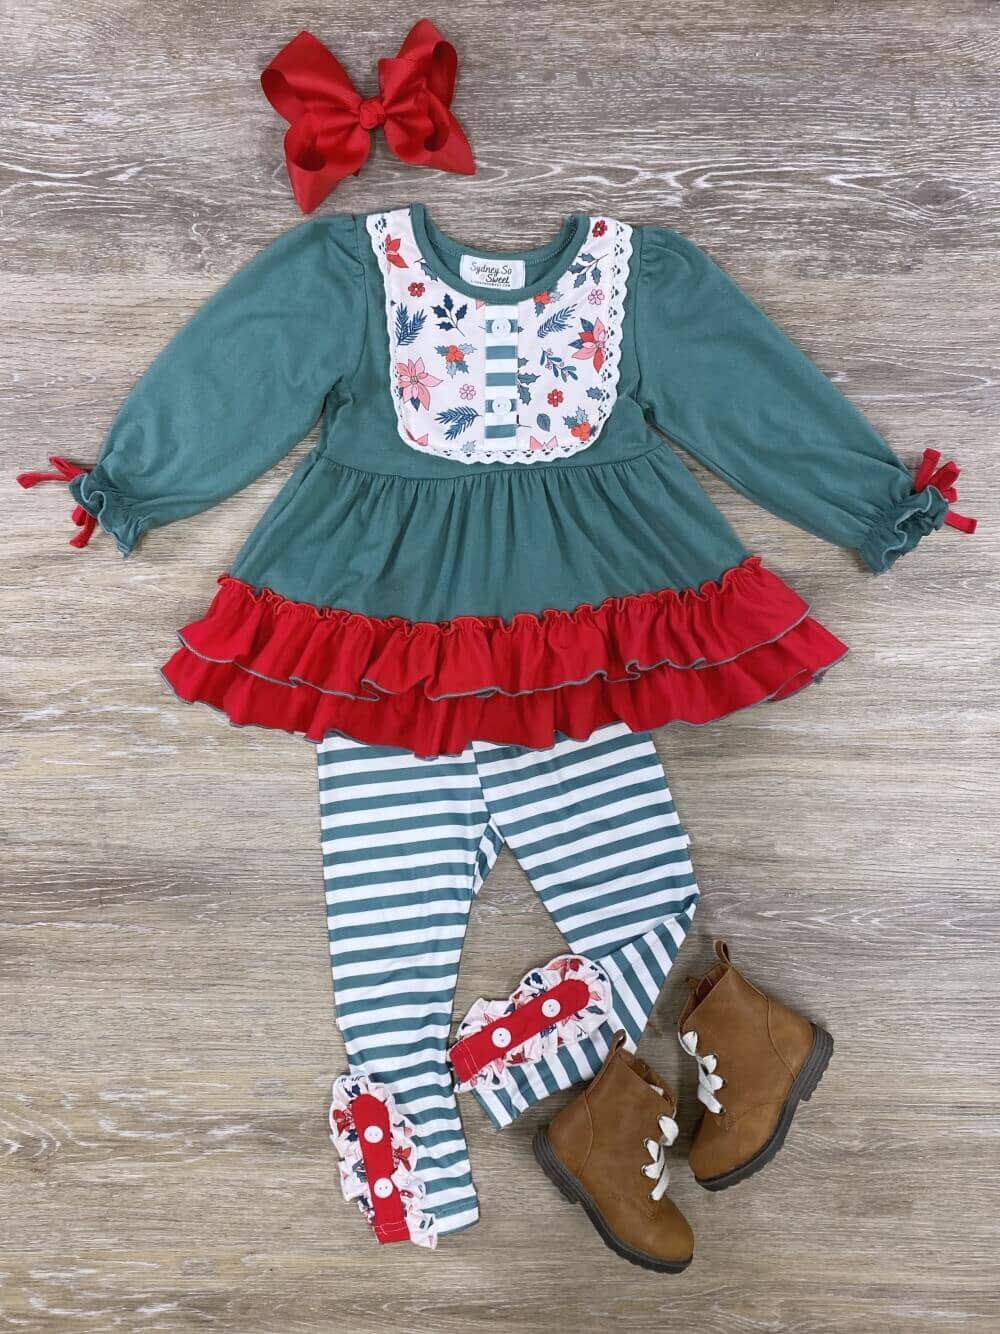 Shop for Little Girls' Christmas Outfits